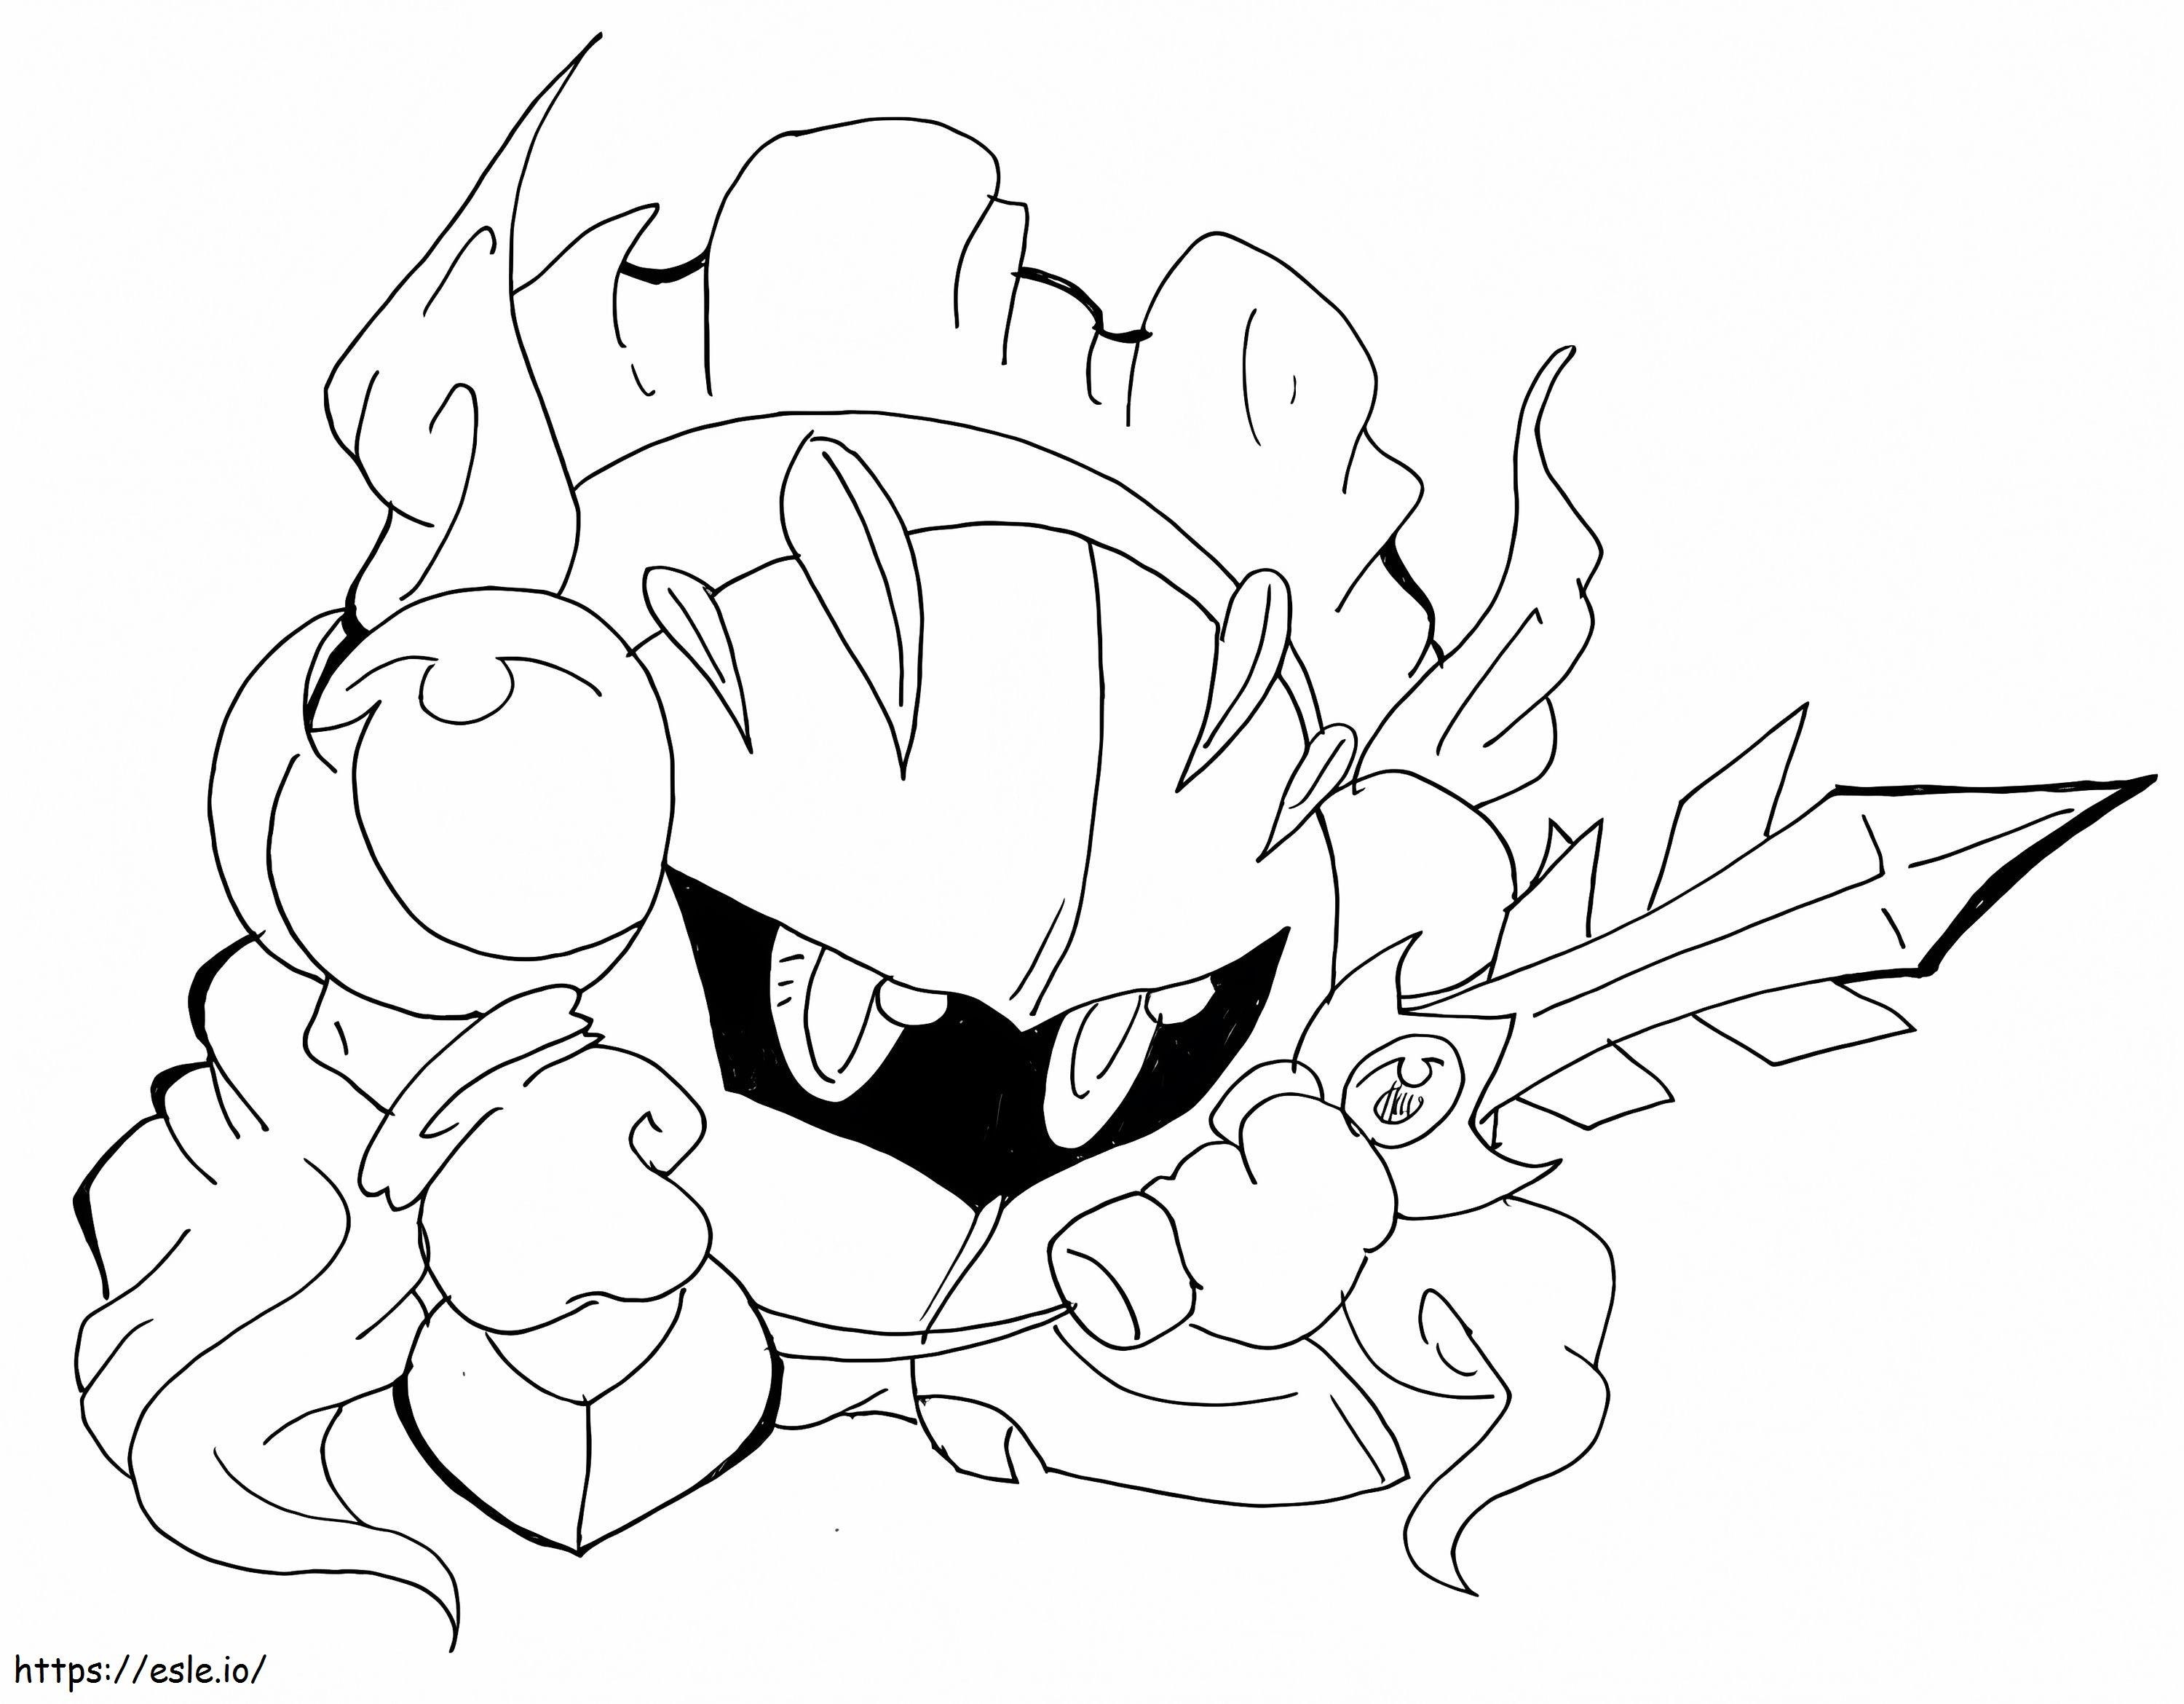 Meta Knight 6 coloring page